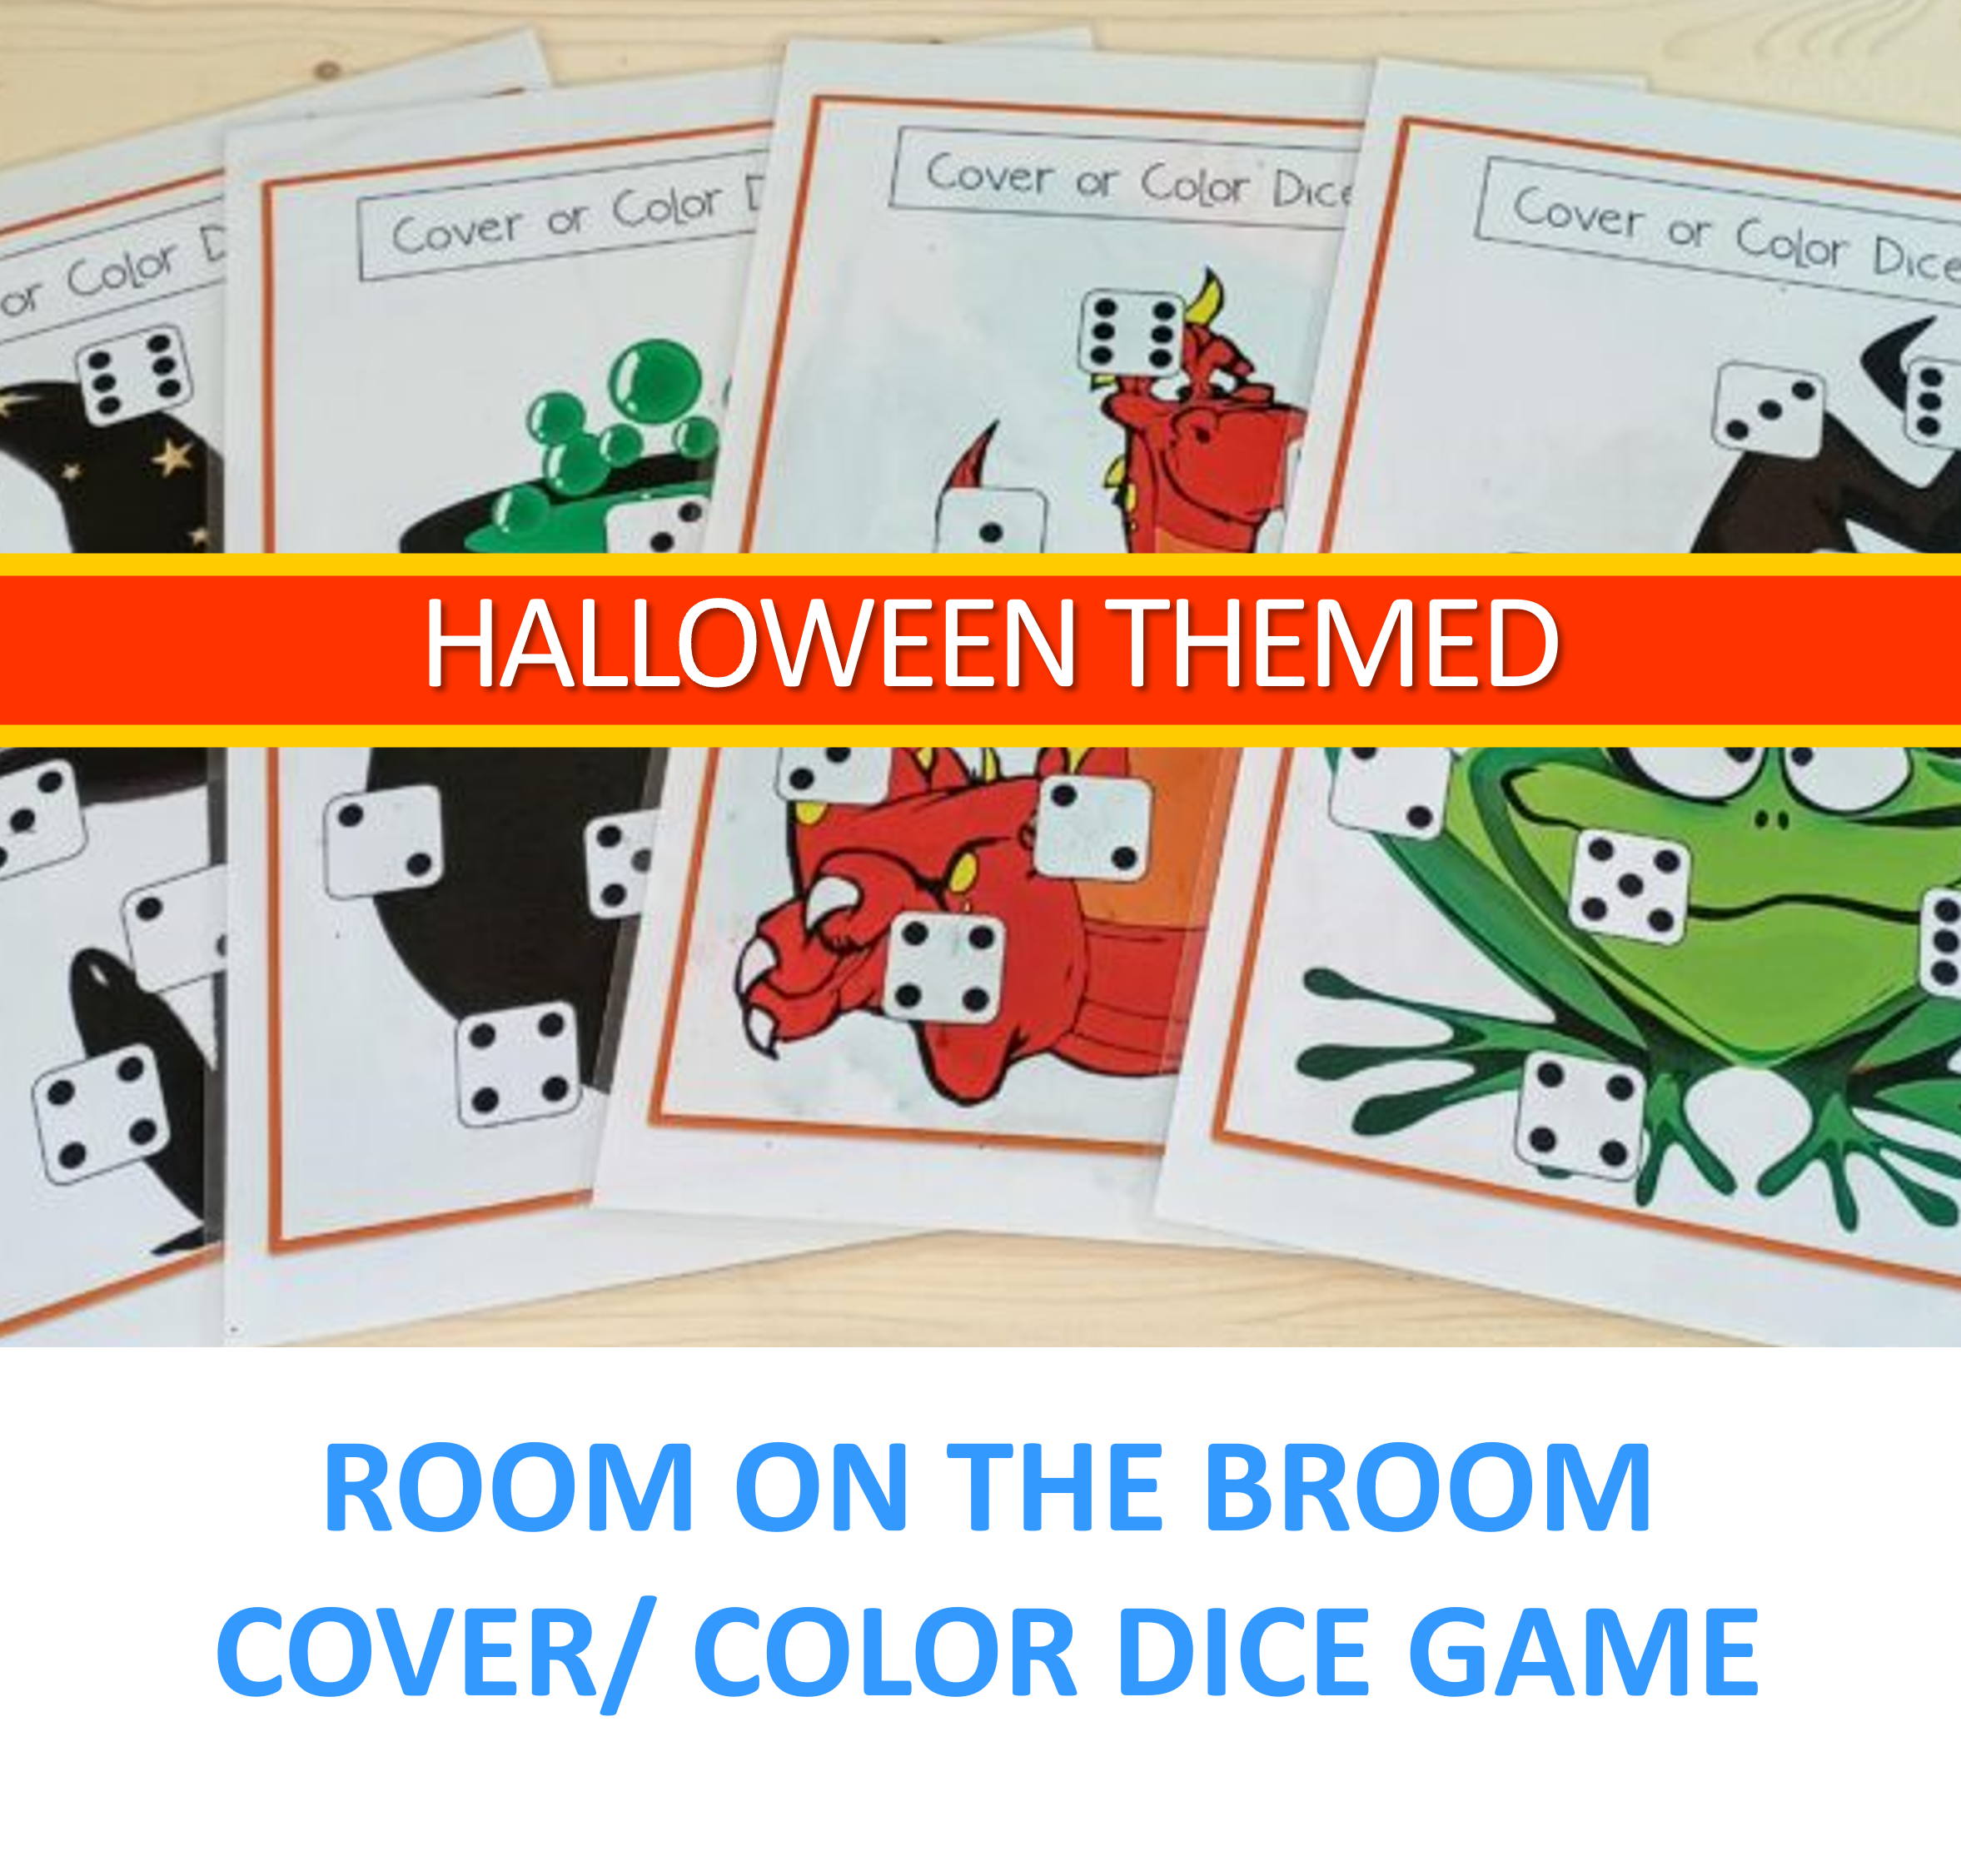 Room on the Broom themed activities